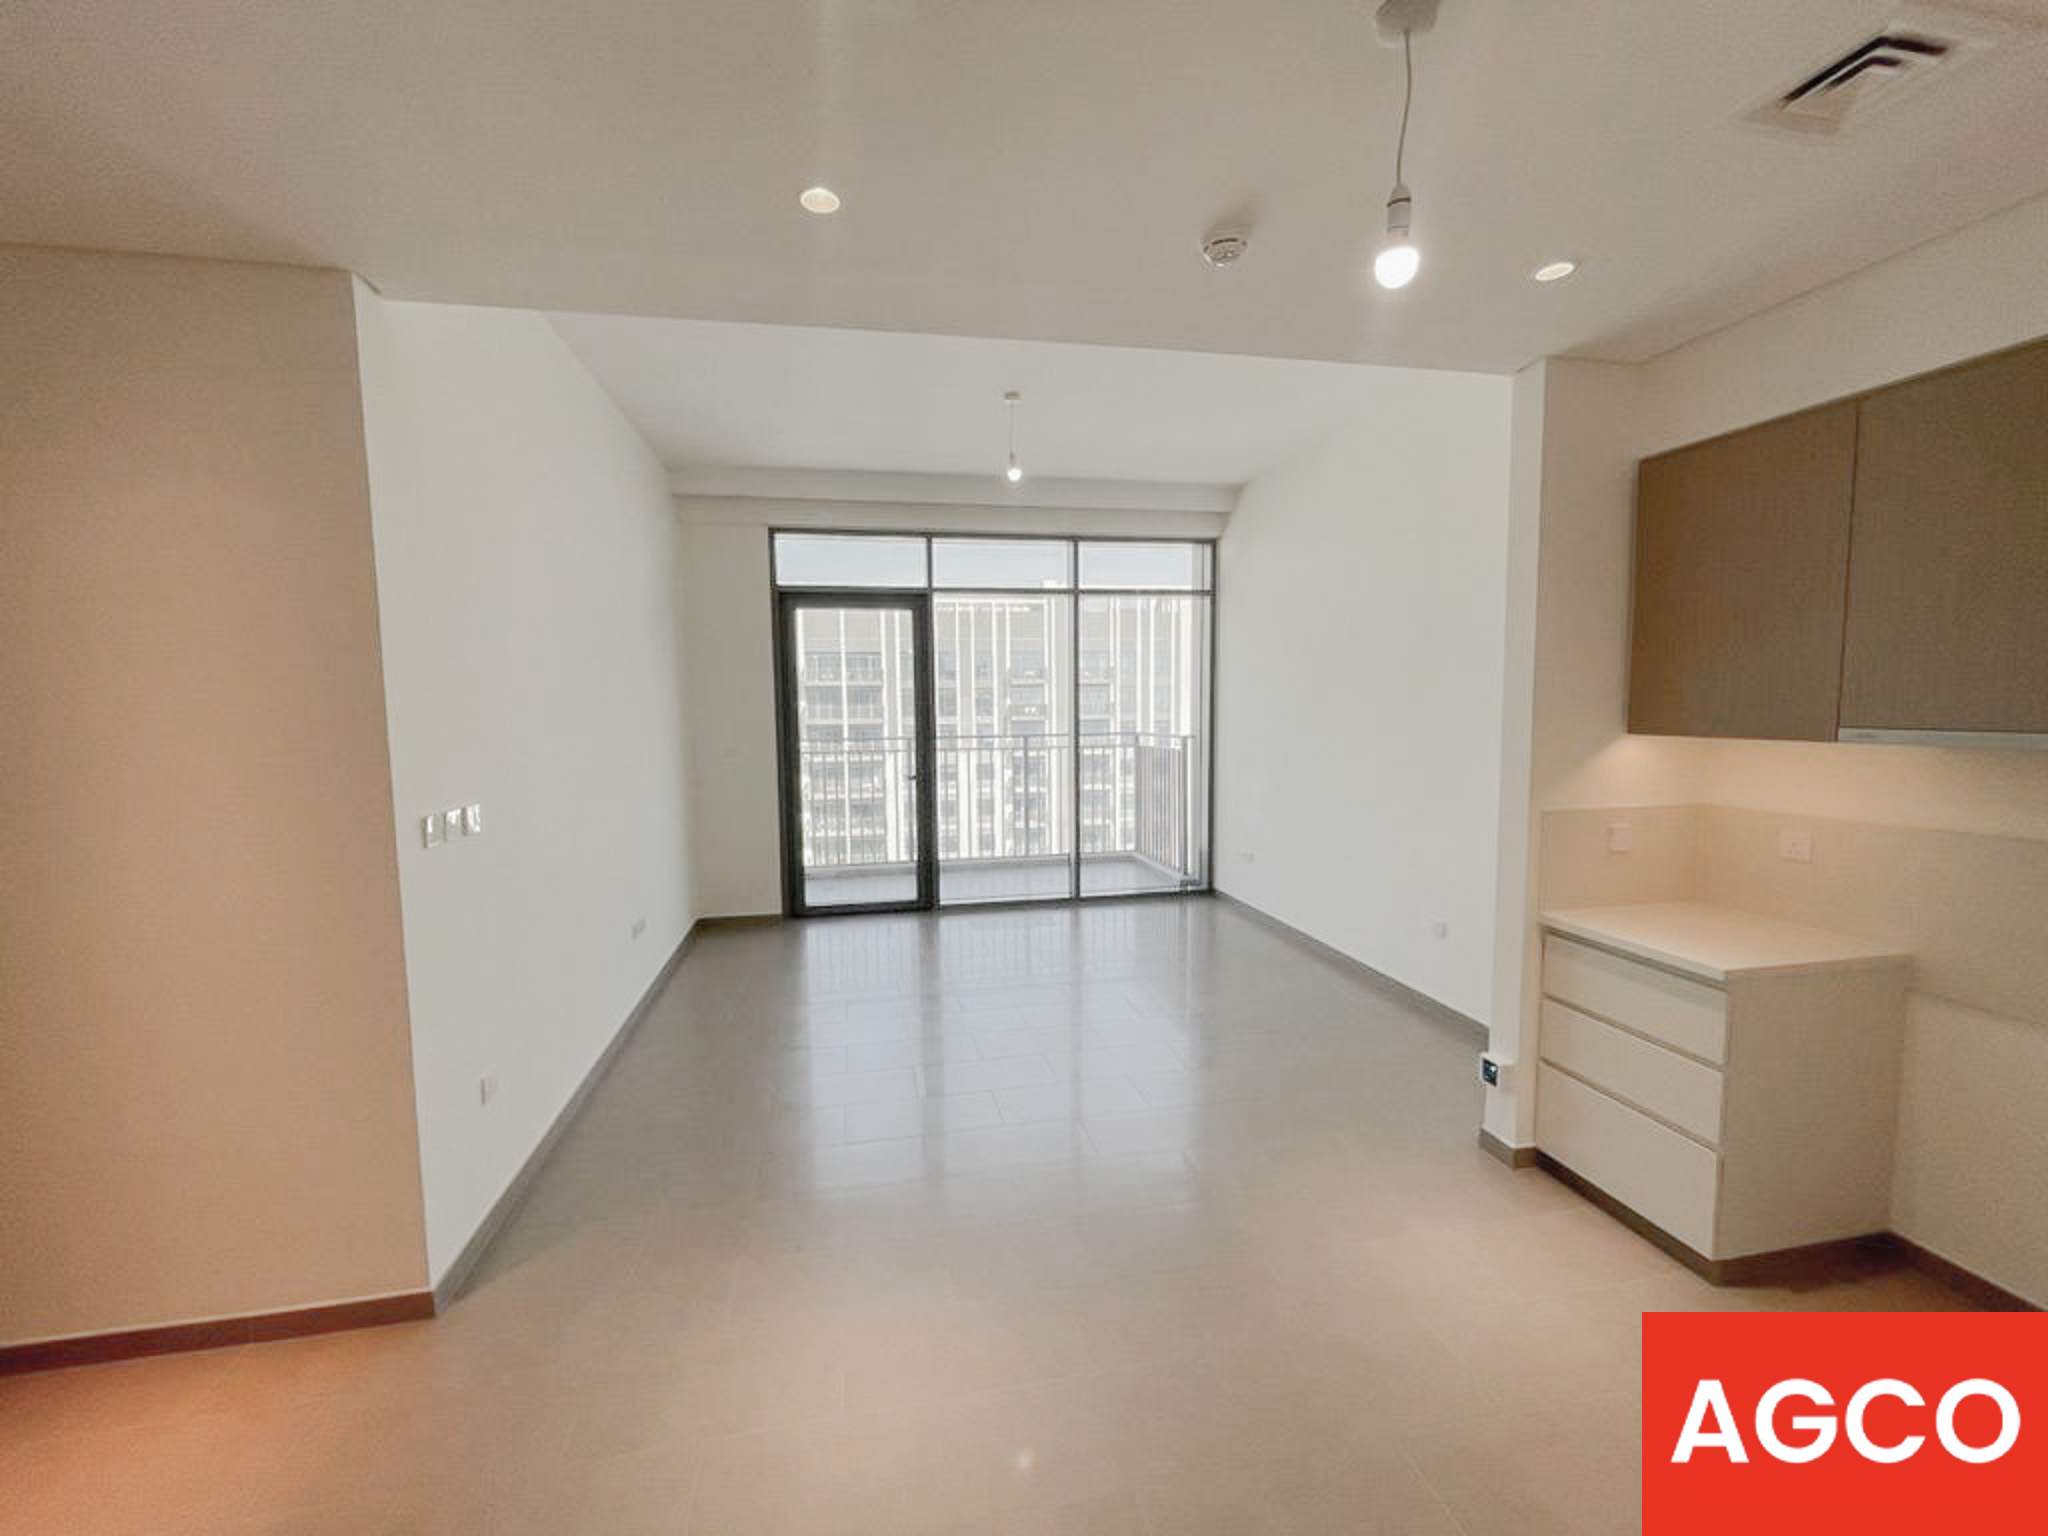 High-floor unfurnished unit ready to move in by March